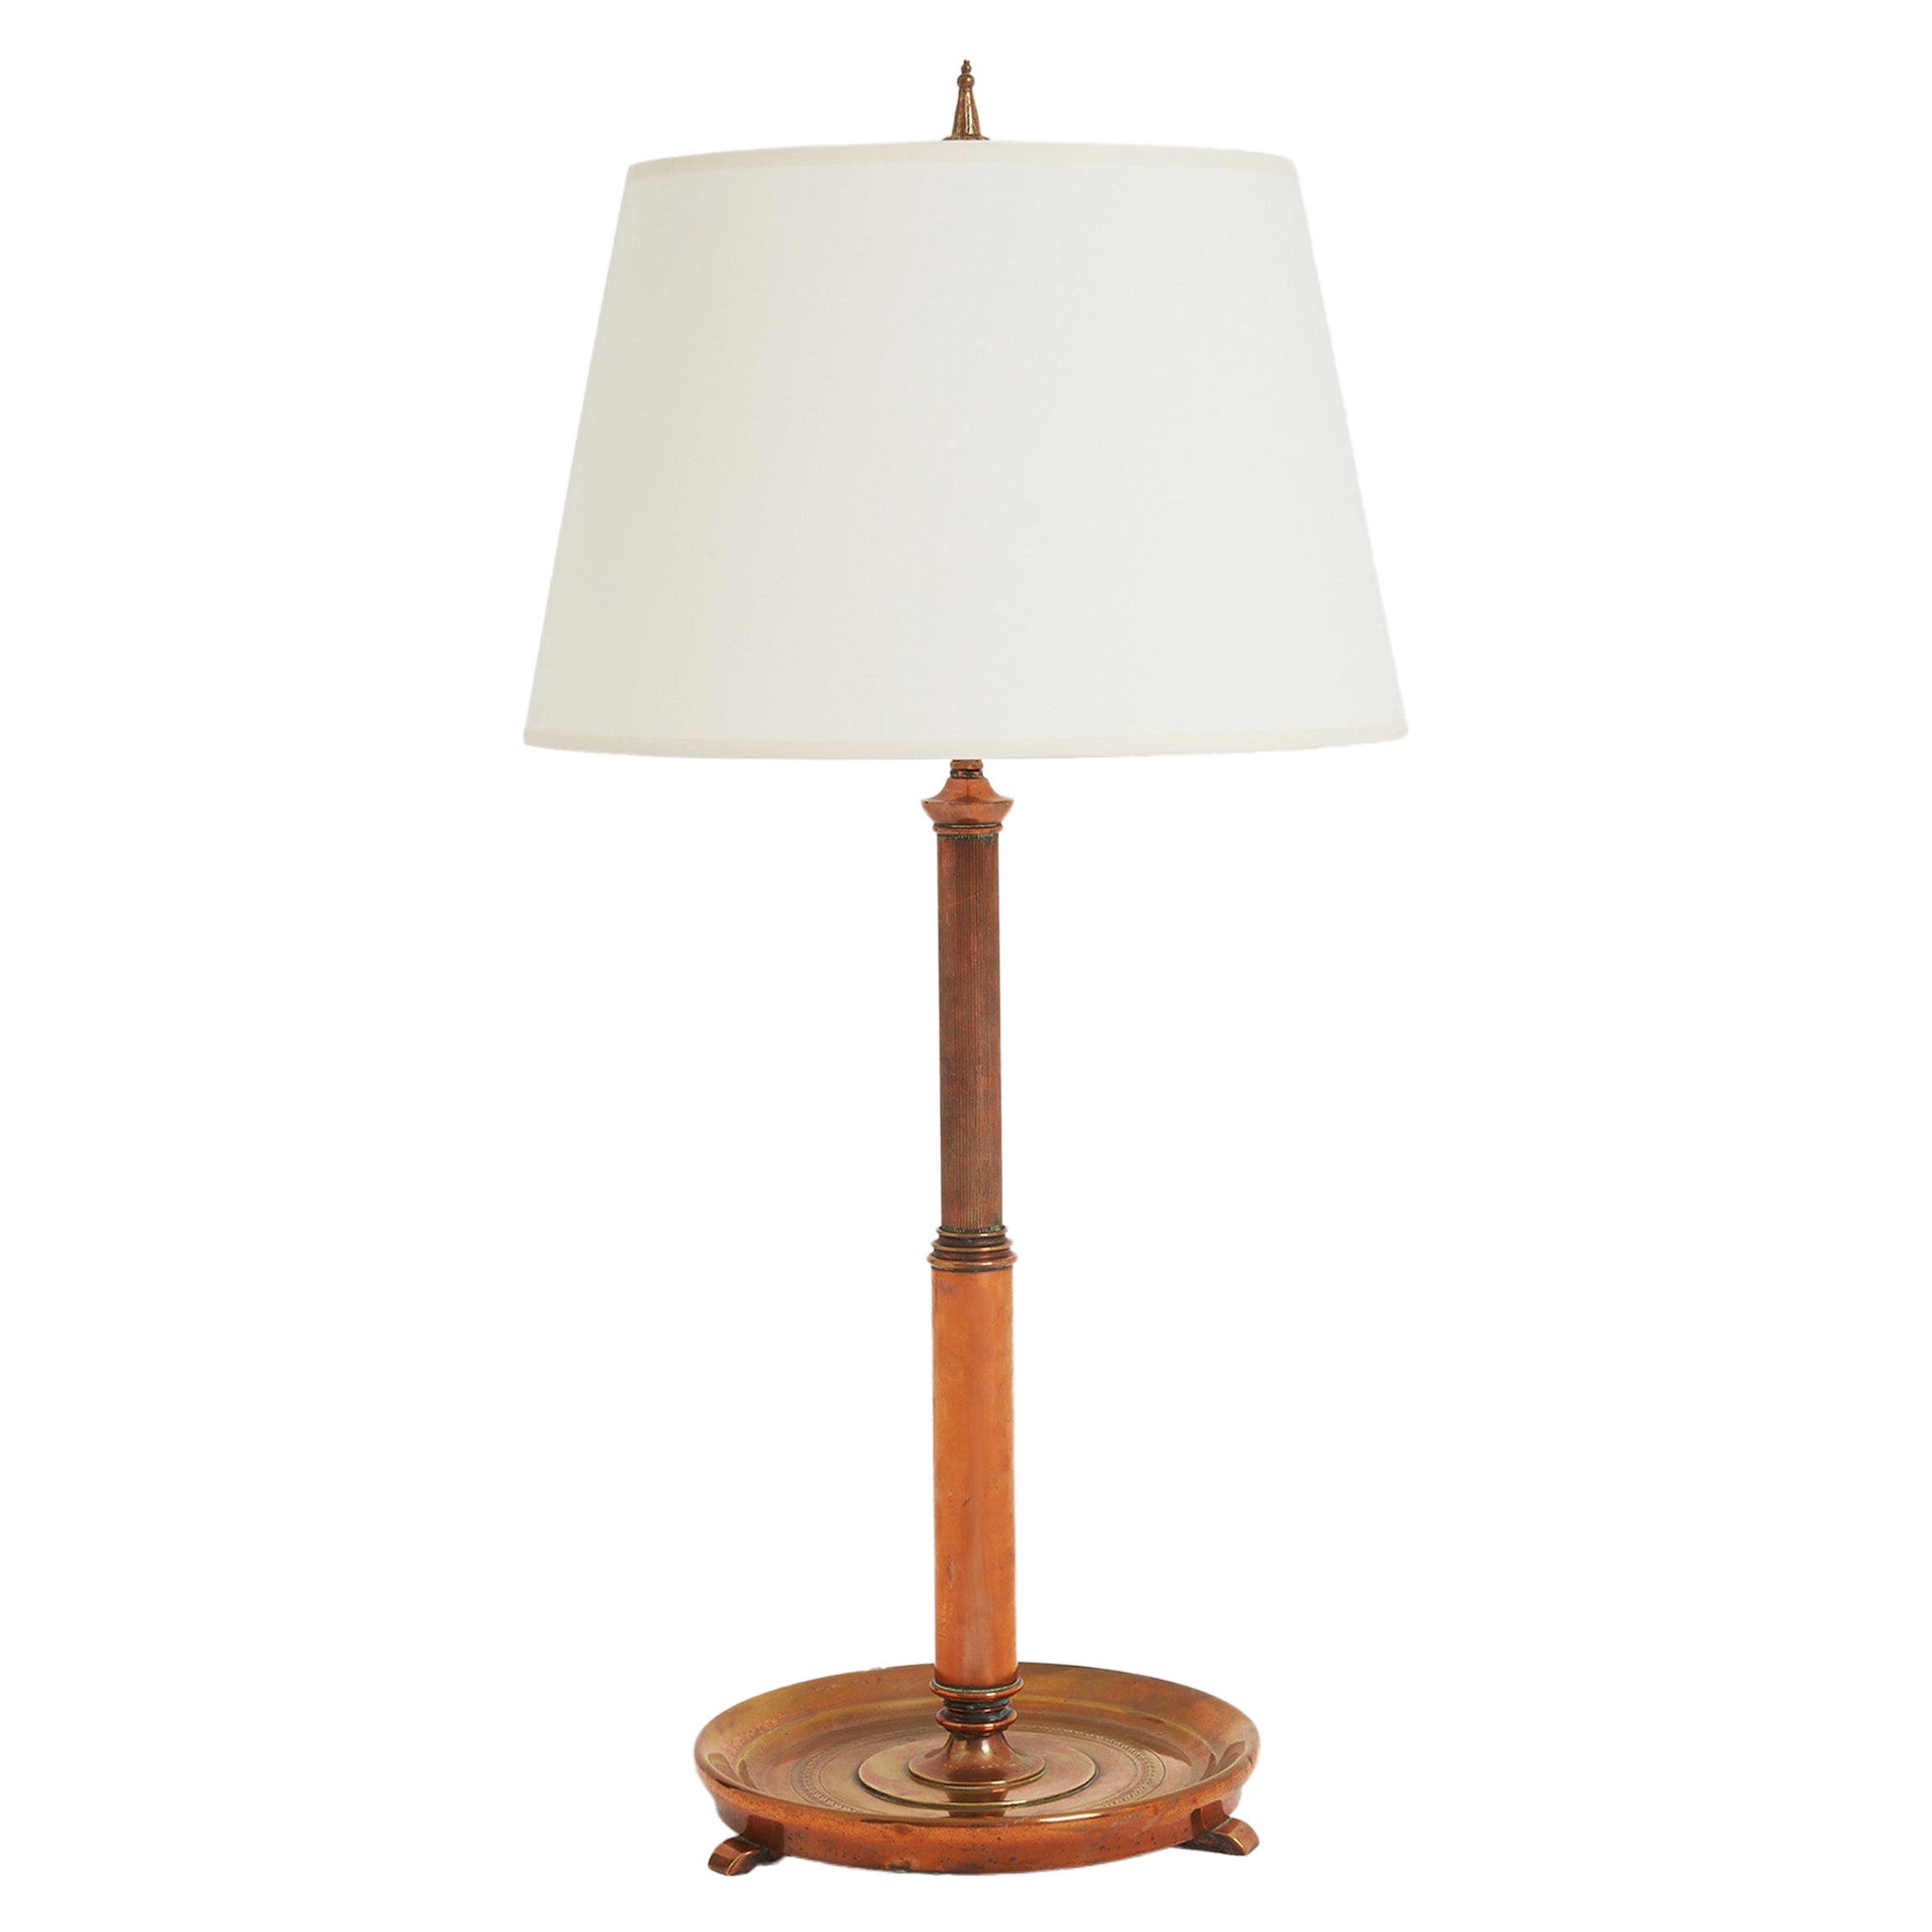 Early 20th Century Copper Table Lamp